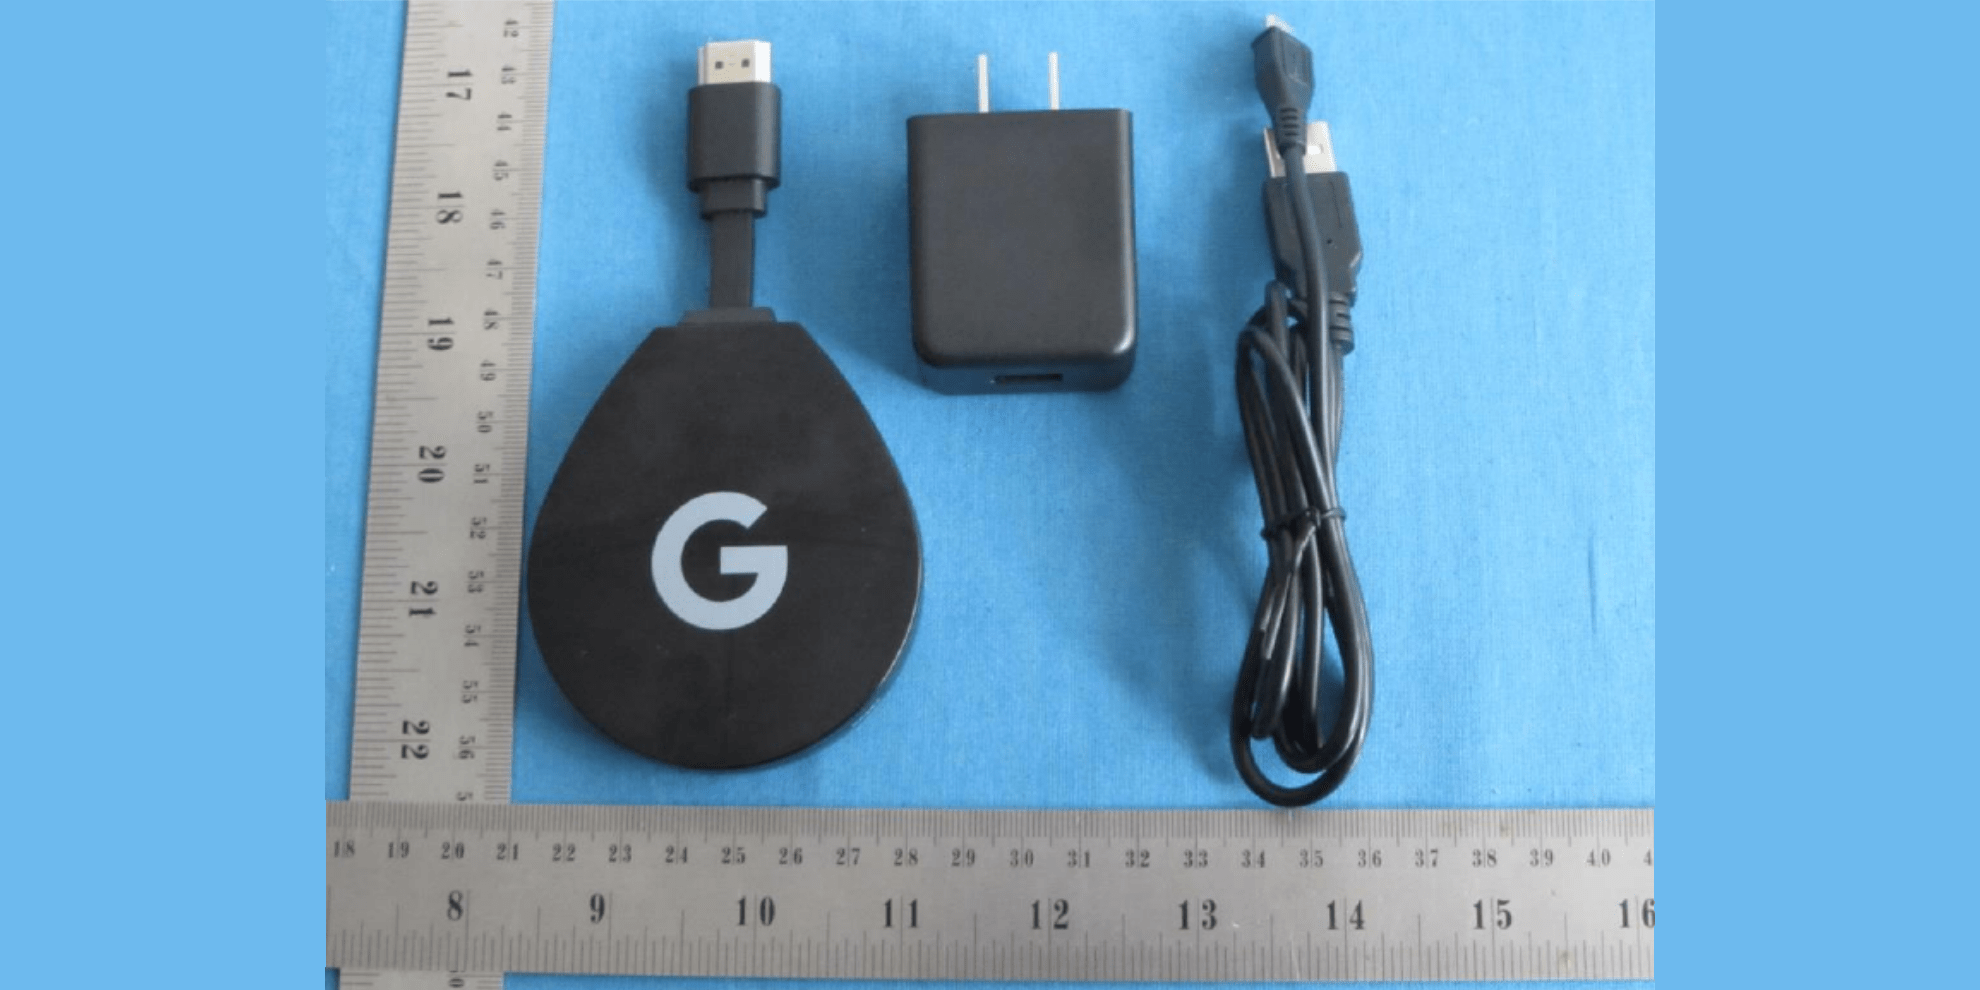 Google Just Got FCC Approval For a New Android TV 4K Dongle